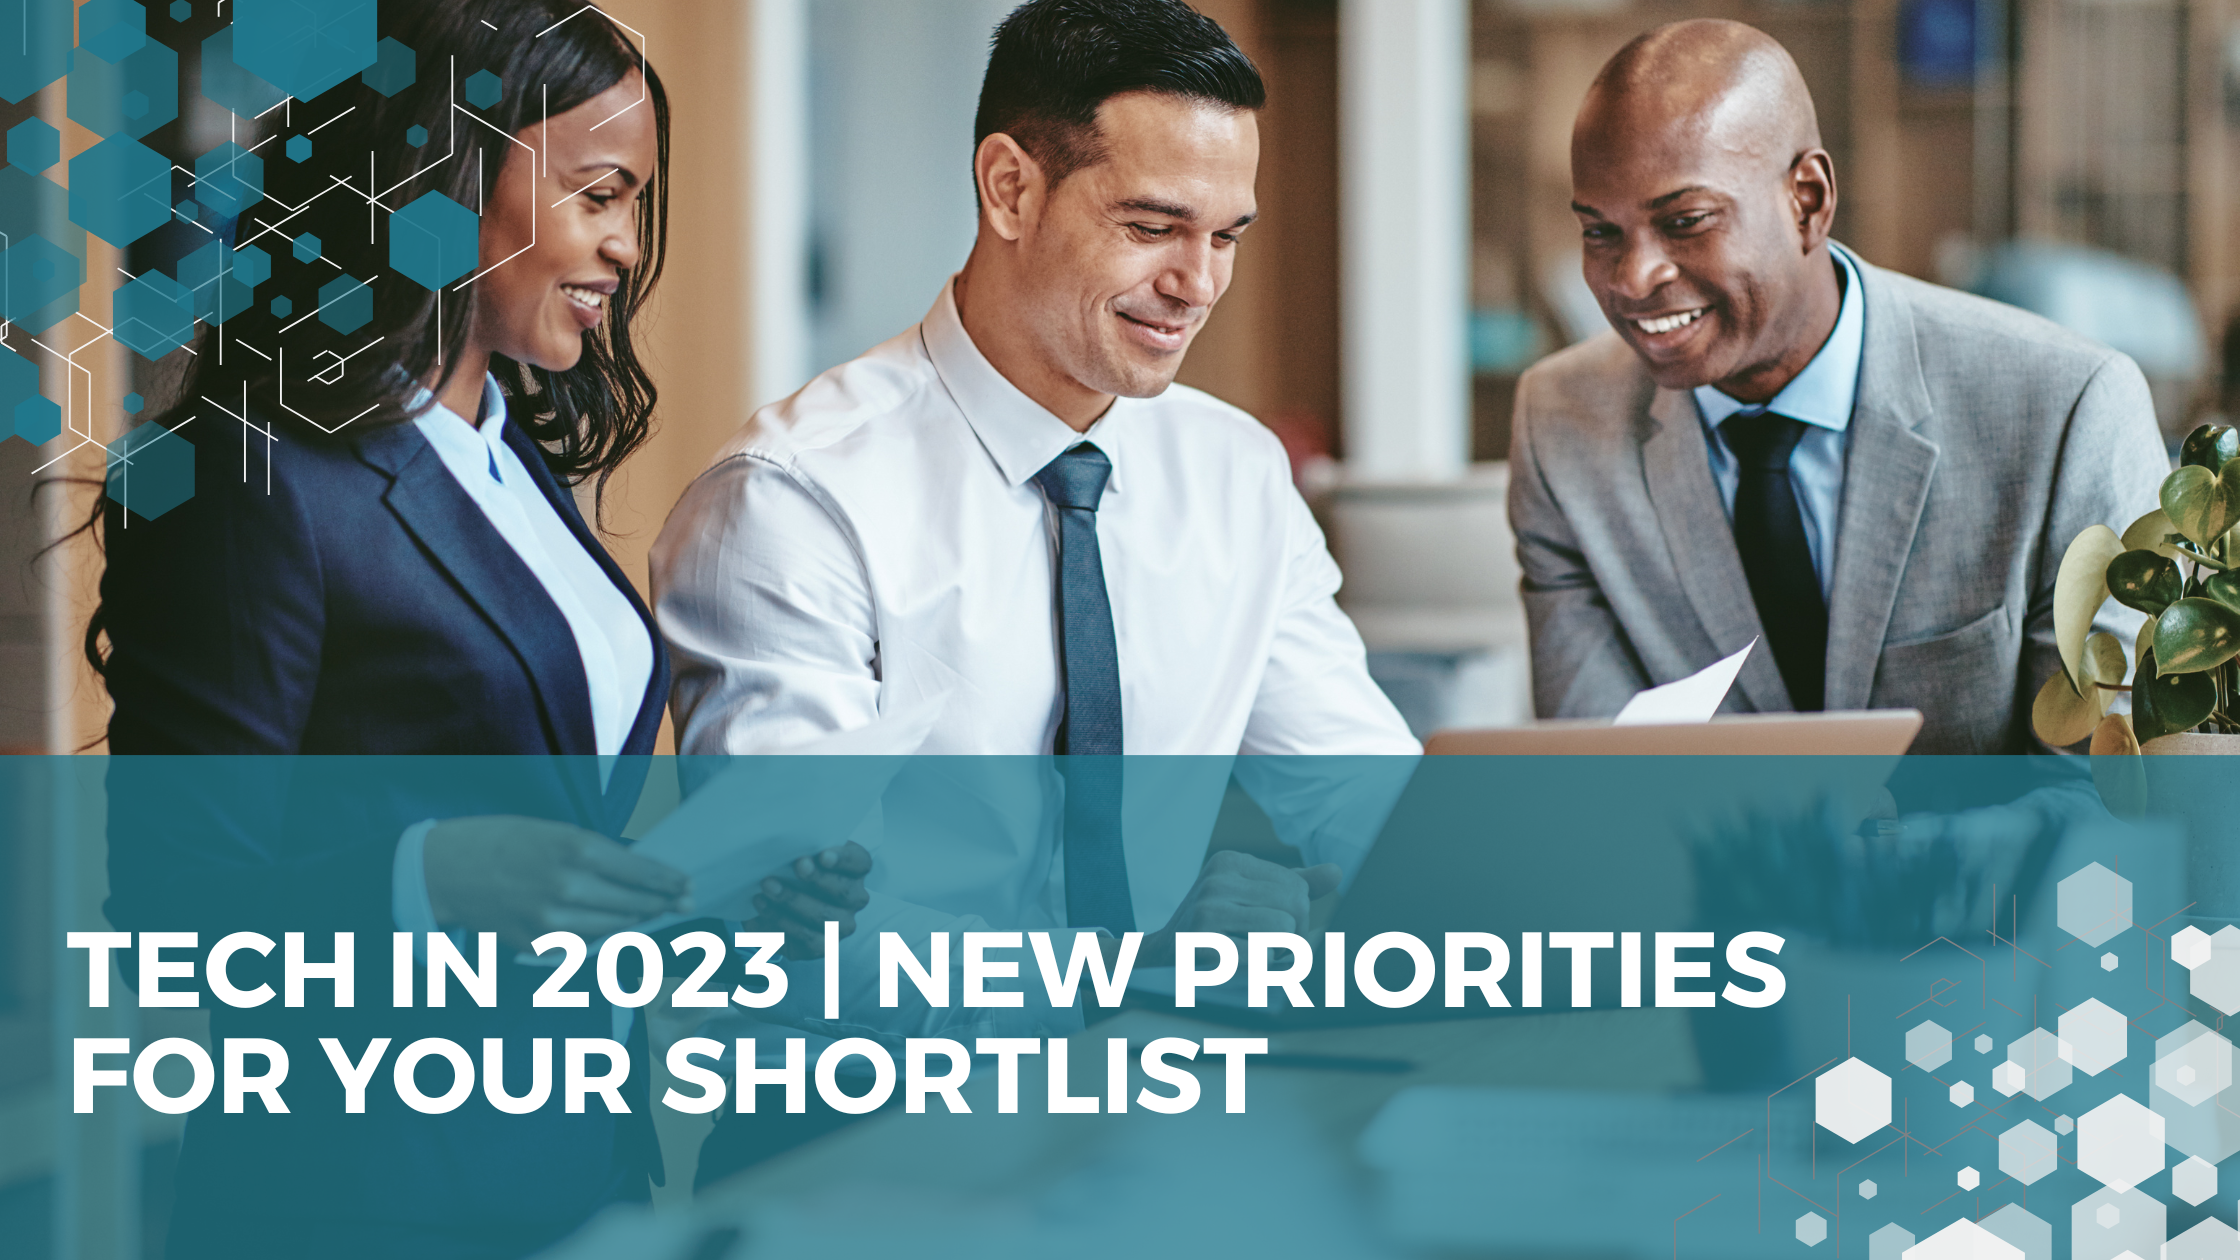 Tech in 2023 | New Priorities for your shortlist